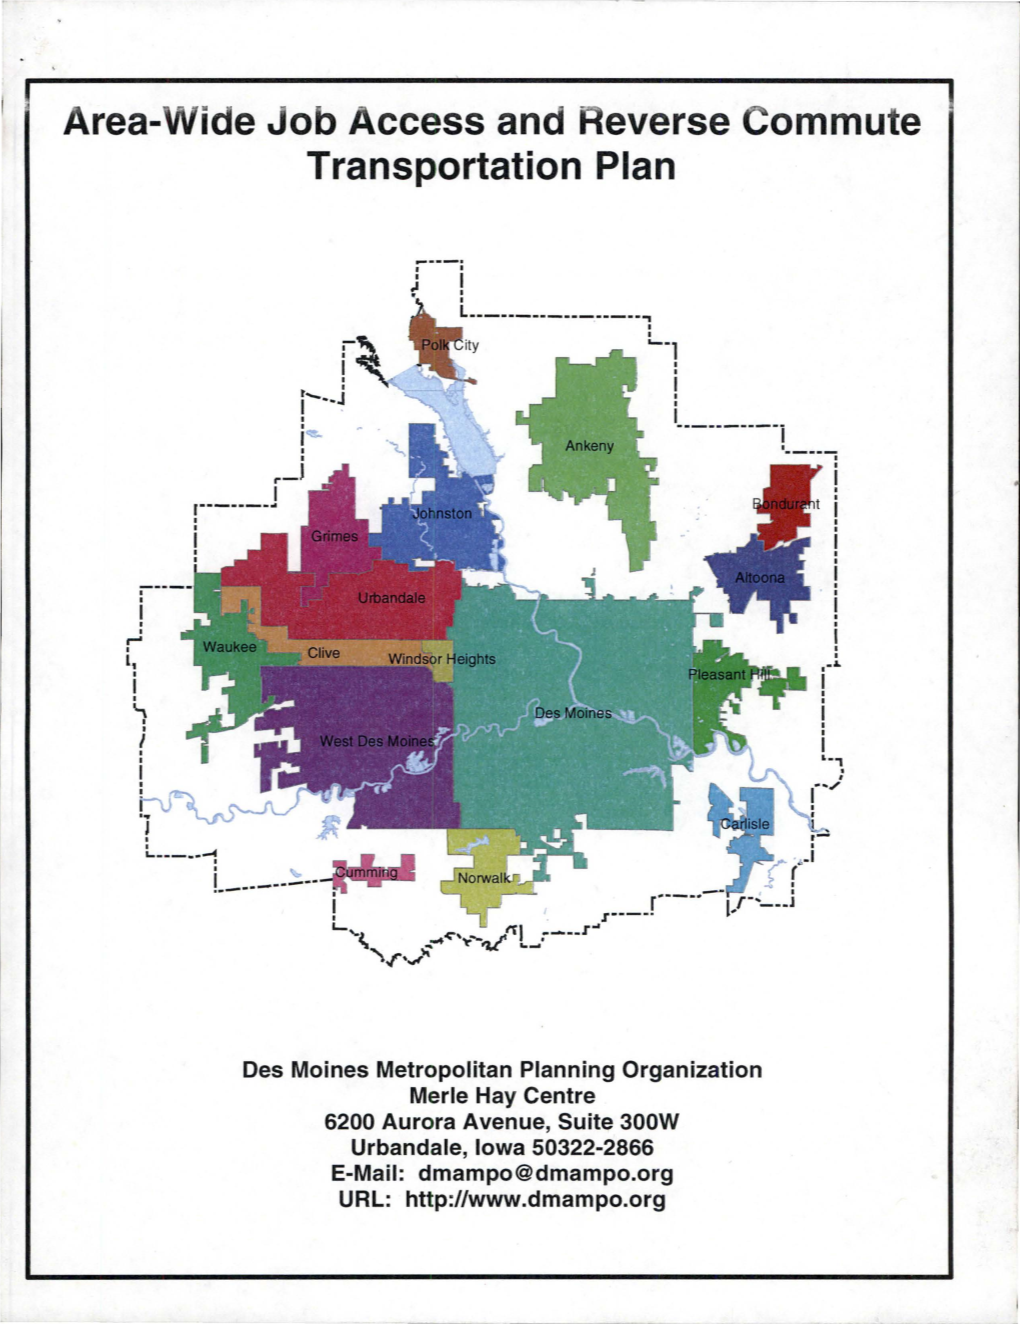 Area-Wide Job Access and Reverse Commute Transportation Plan